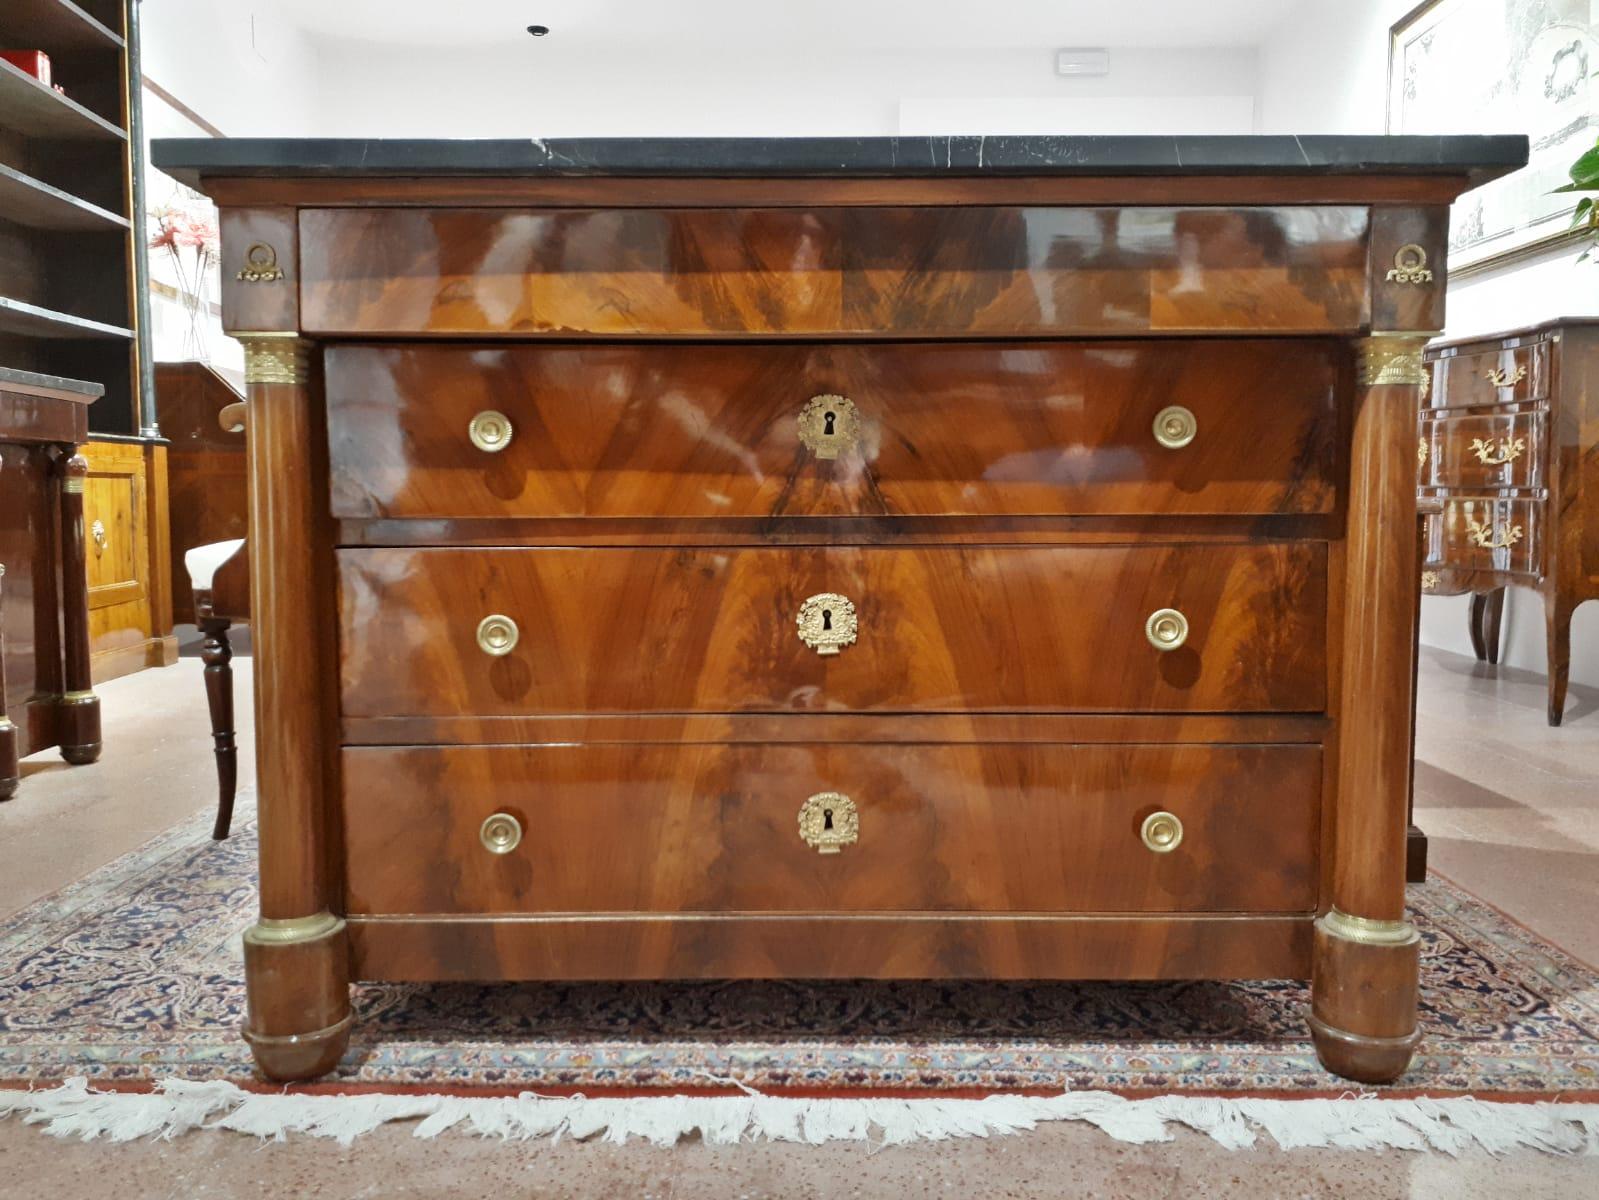 Beautiful Empire French dresser commode, early 19th century. Flame walnut, Marquinia marble, bronze details, and four drawers.

French dresser Empire of excellent quality, made with walnut wood, very elegant, with knobs and bronze details. With a